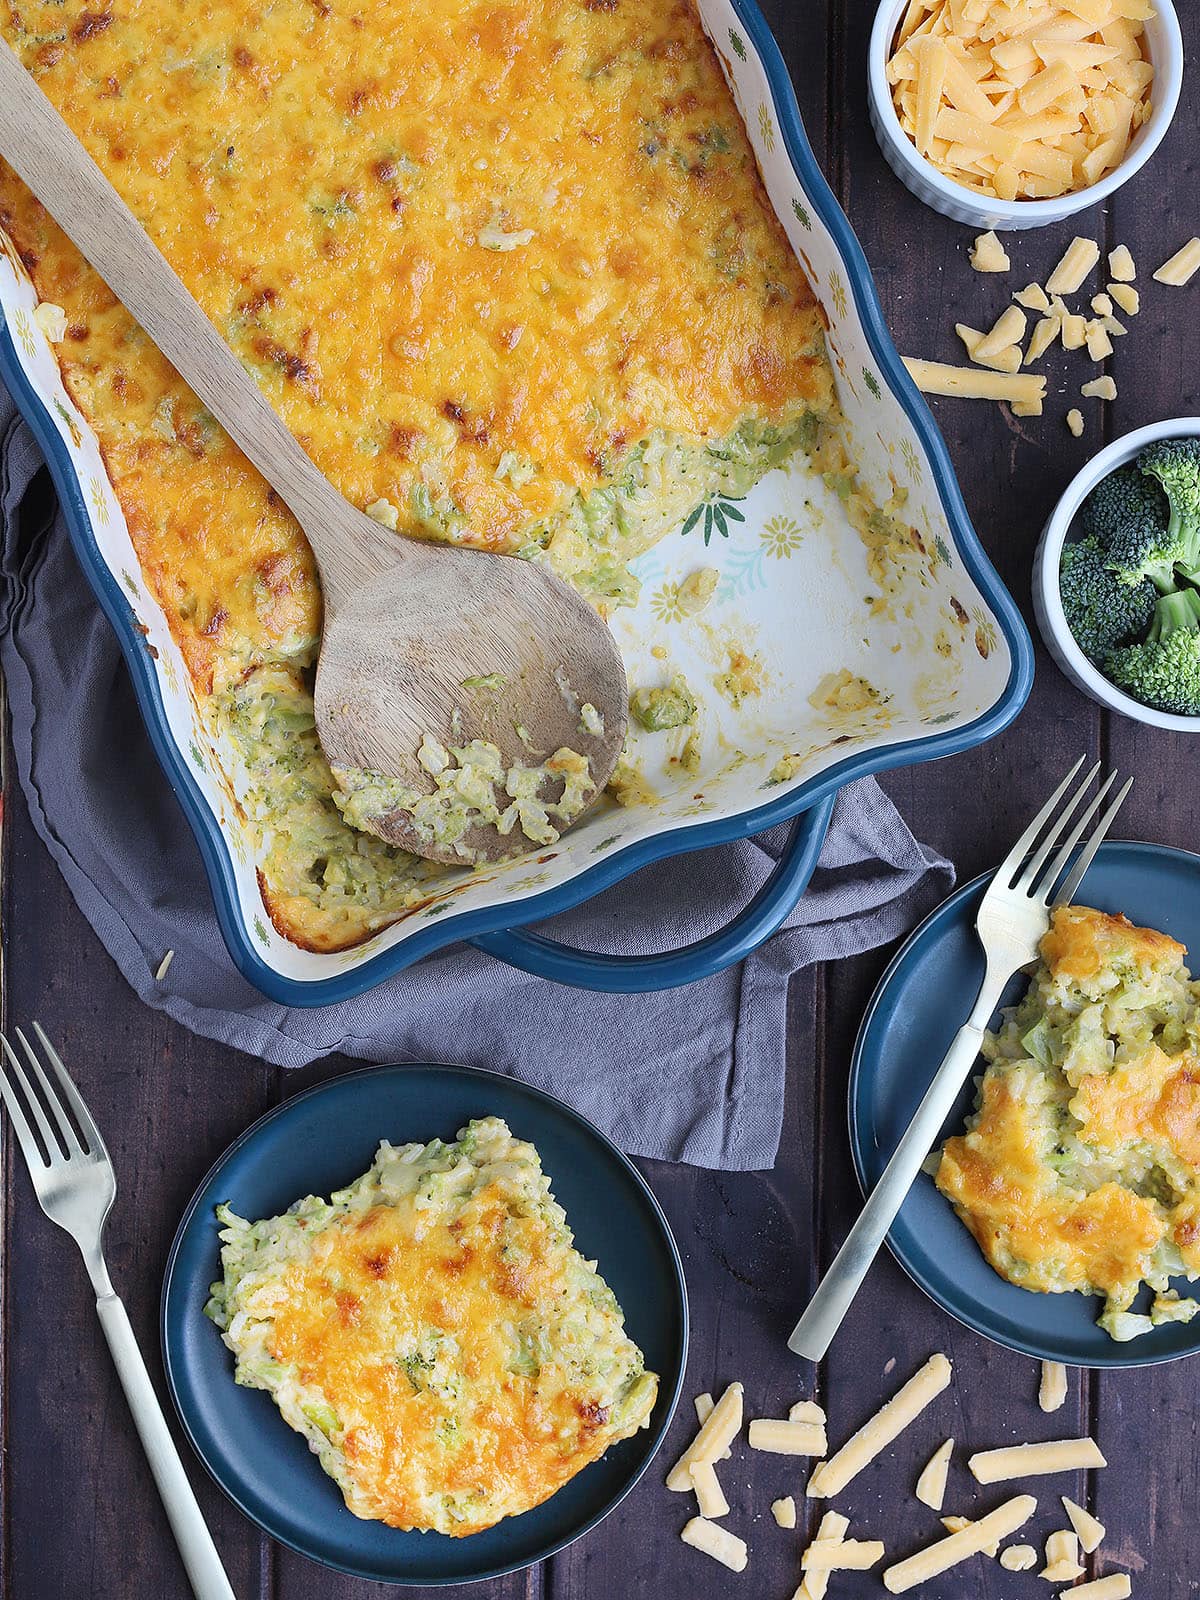 wooden serving spoon laid across the casserole dish with servings of cheesy broccoli casserole on the side